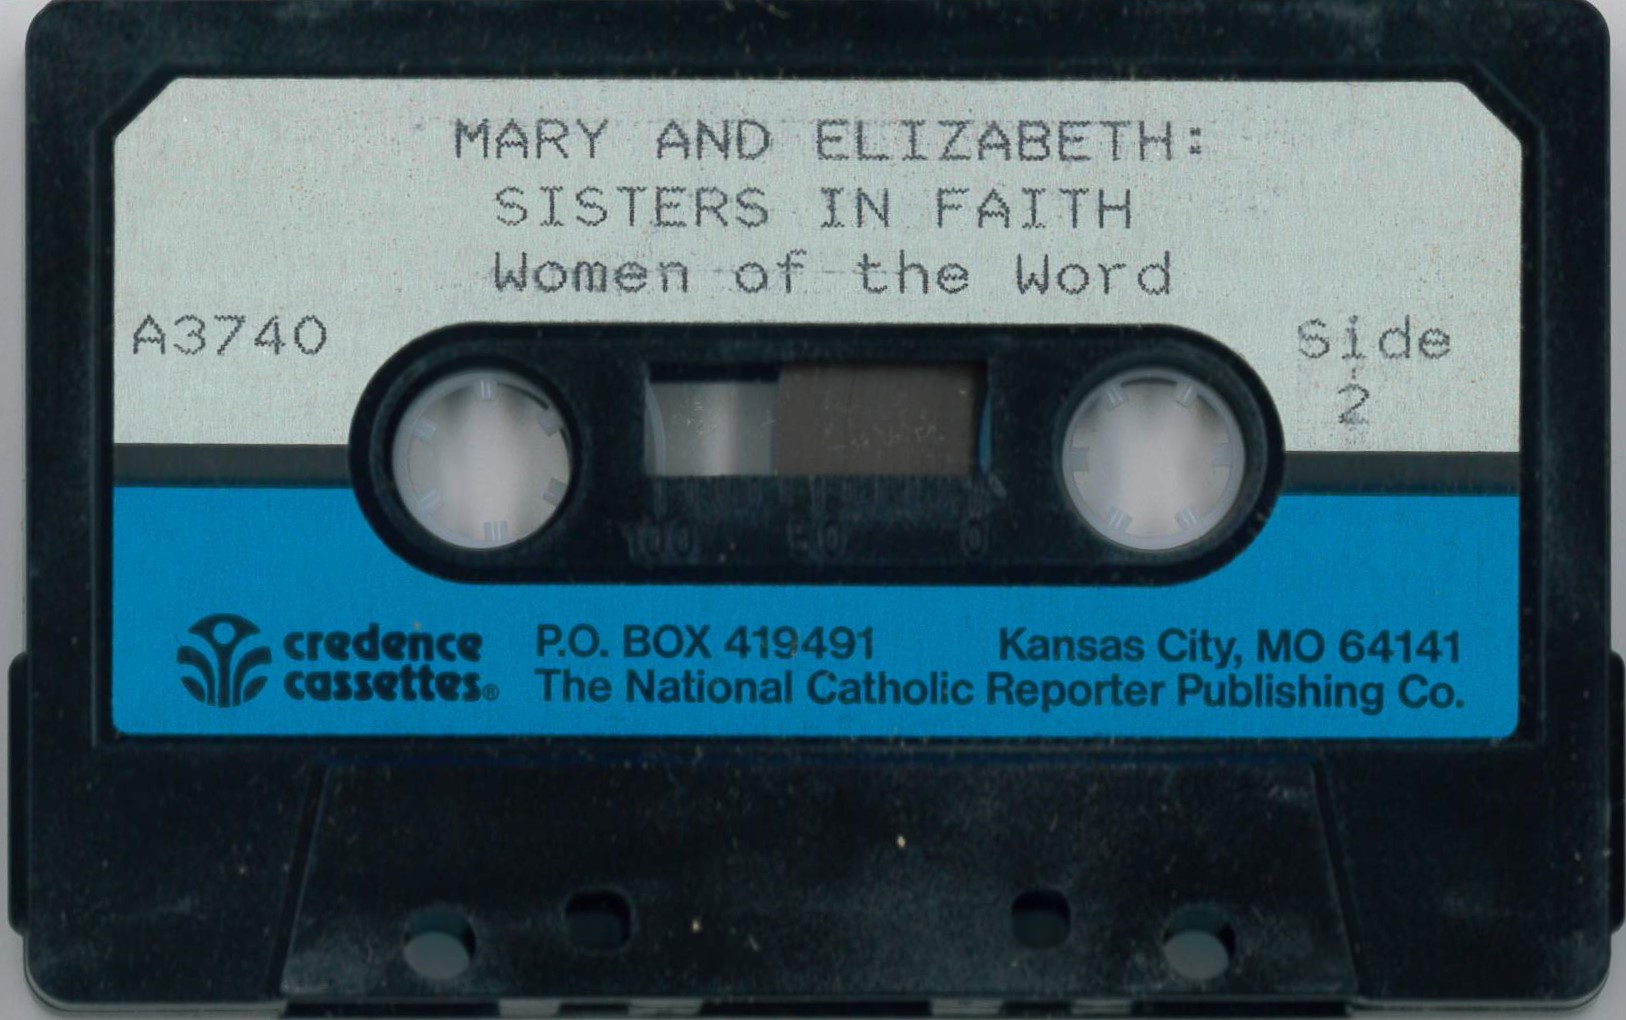 Mary and Elizabeth: Sisters in Faith.